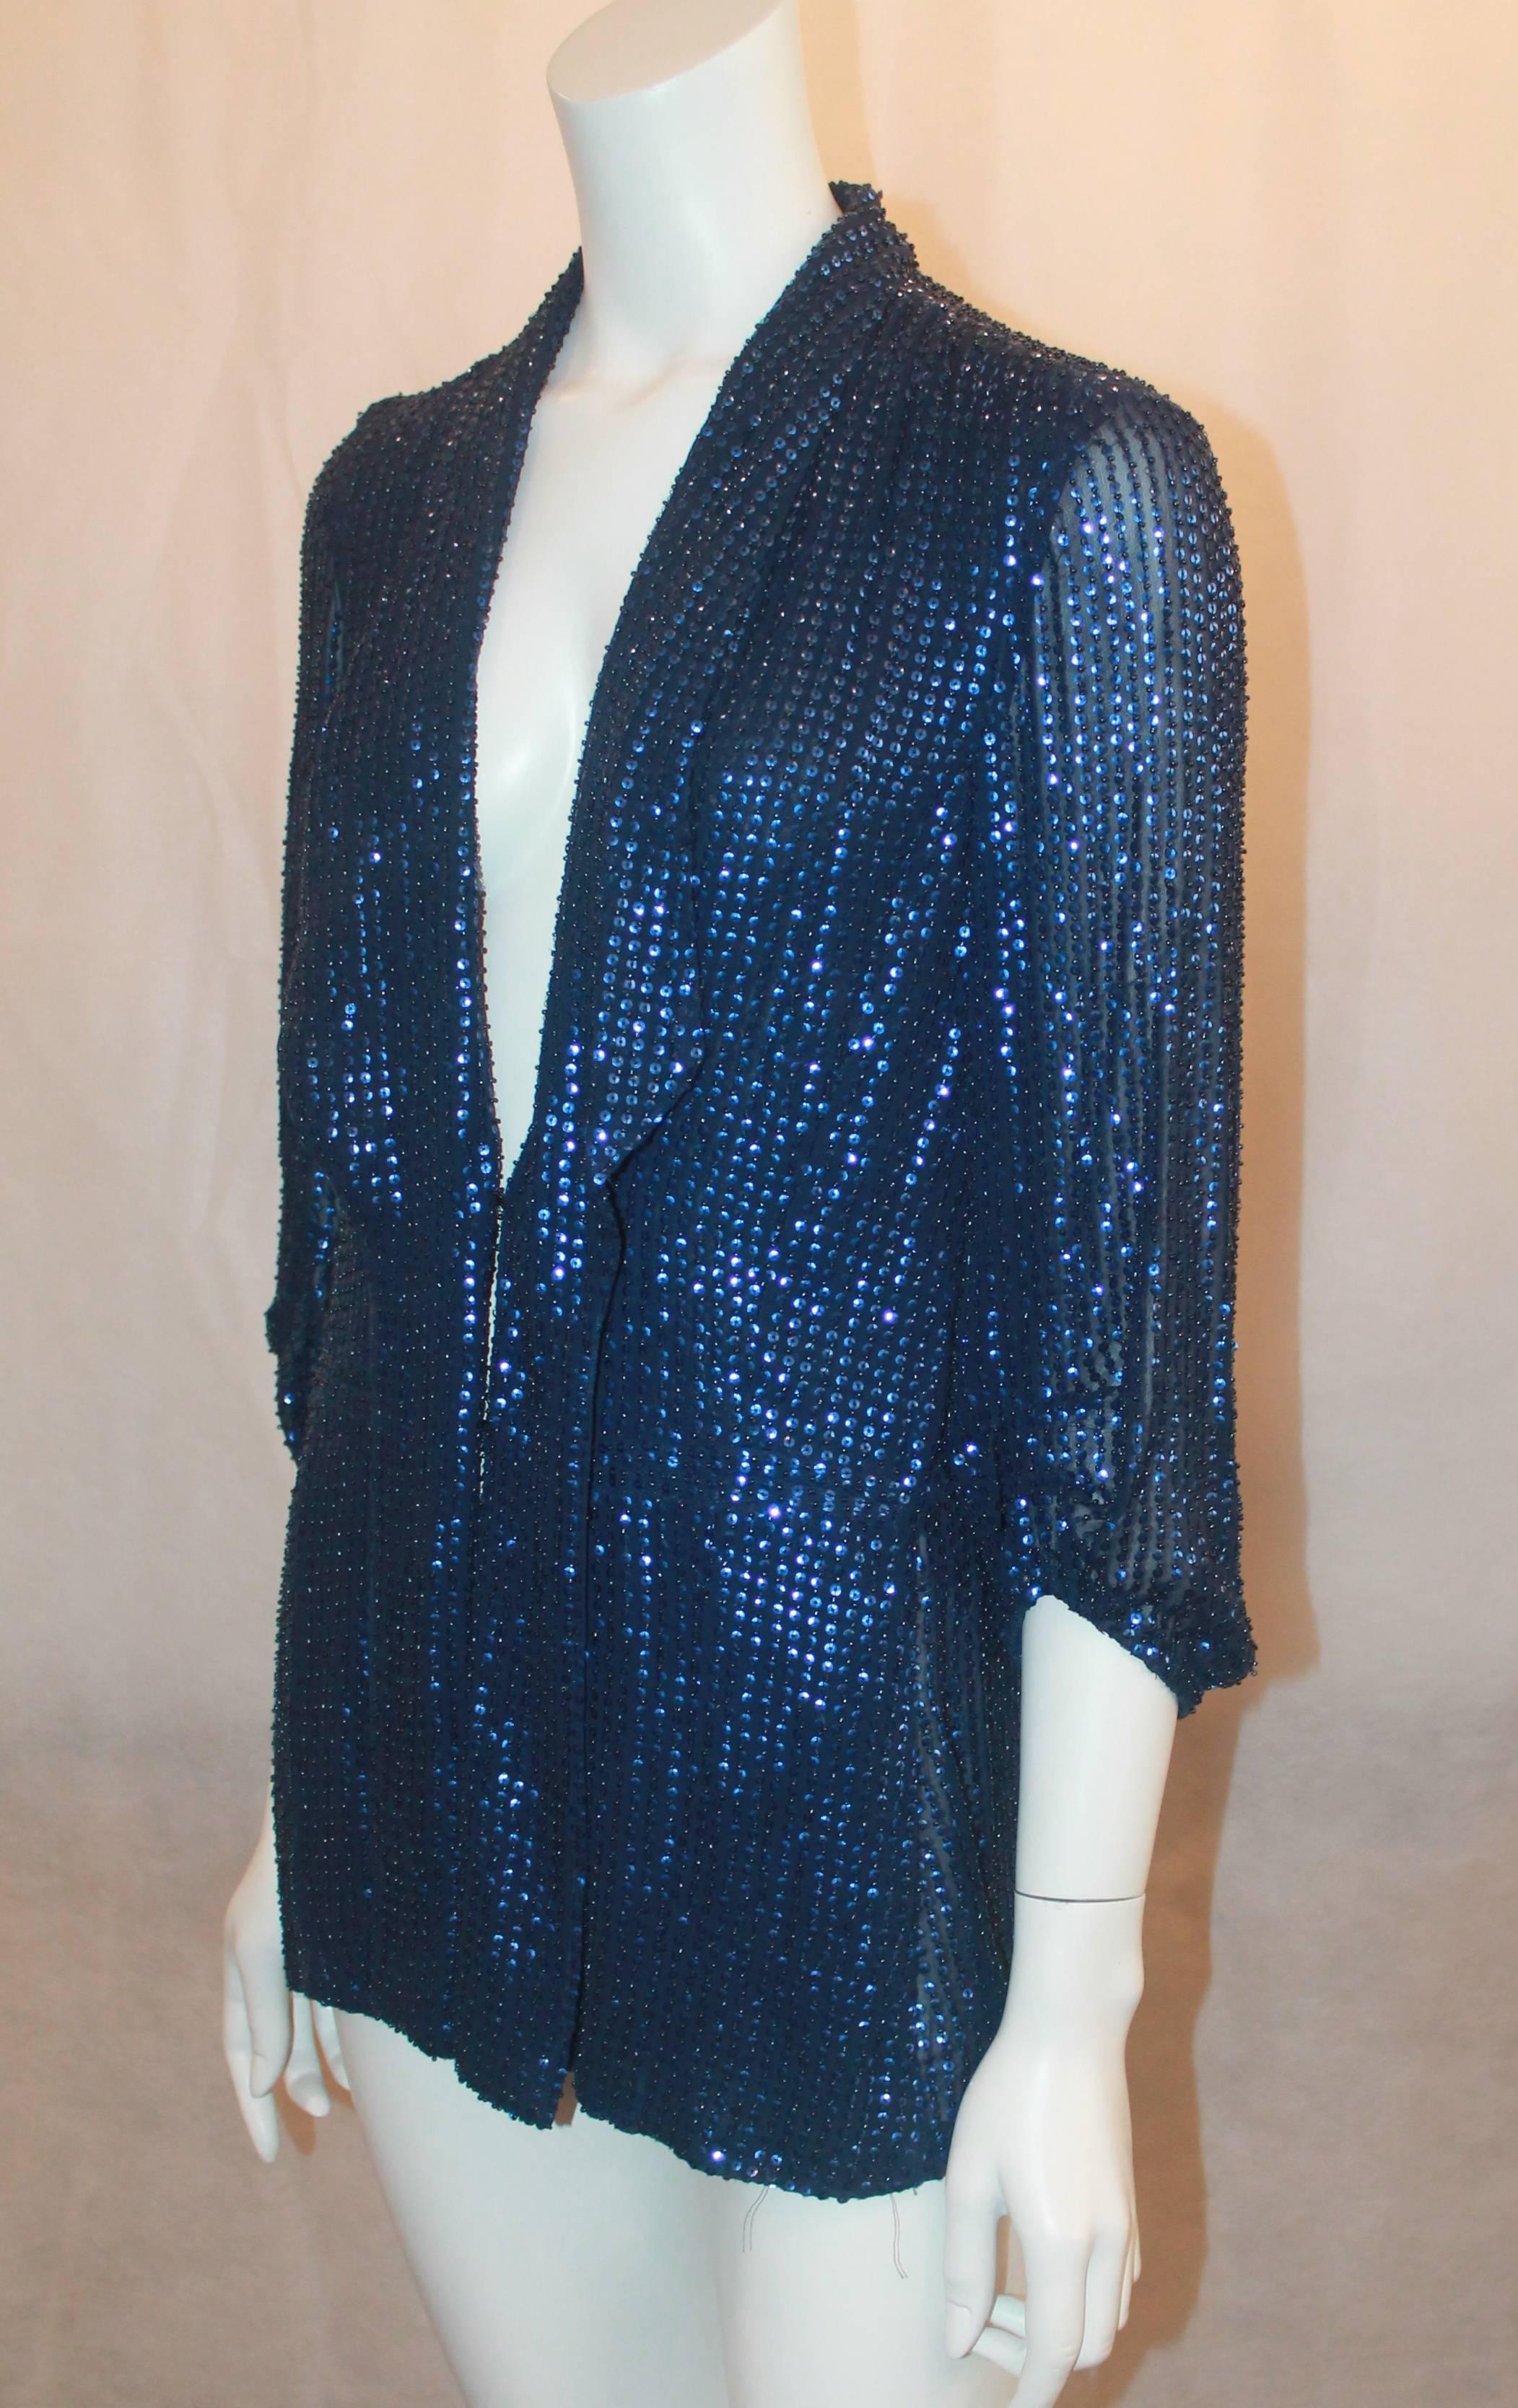 Diane Von Furstenberg Blue Sequin Loose Blouse - 6. This blouse is in very good condition and is a unique, gorgeous piece. The main tag is gone and there is a small hole in the fabric by the left shoulder. It features cinched sleeves, pleats along